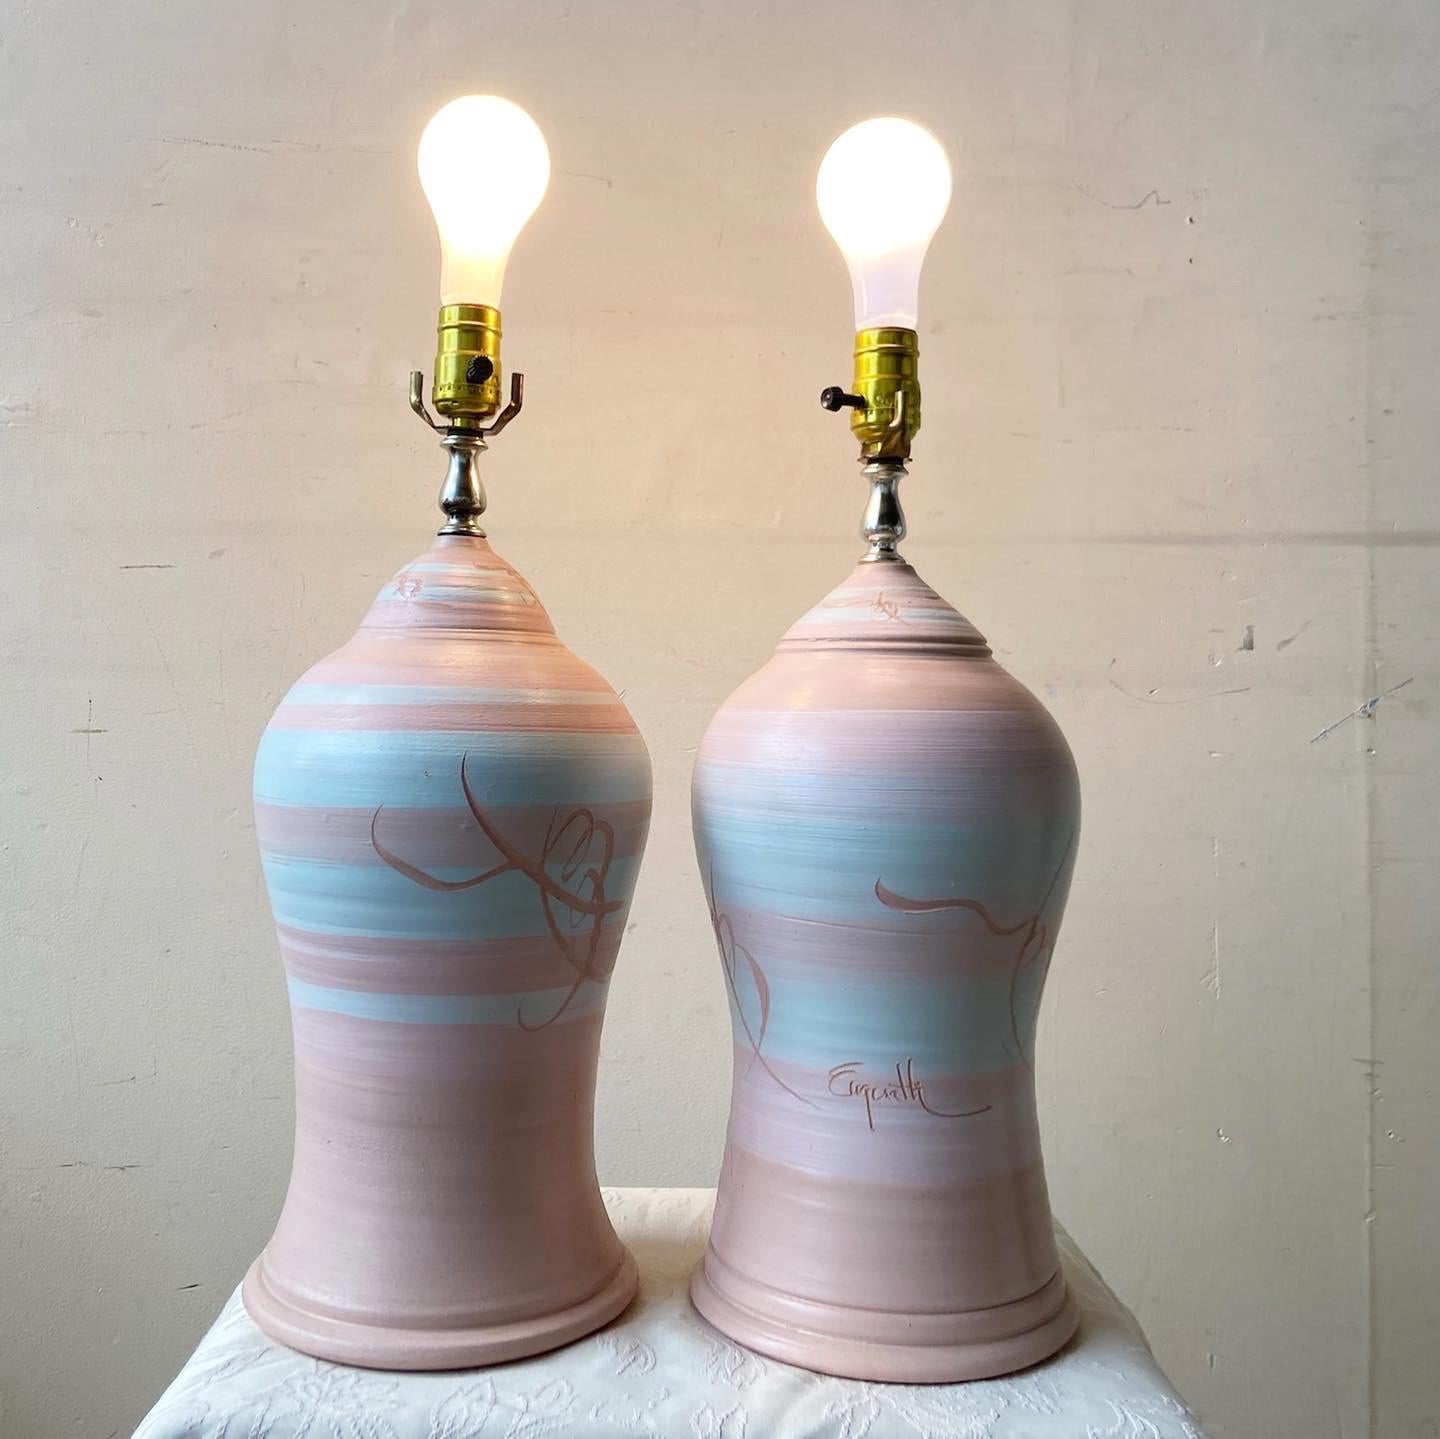 Incredible pair of postmodern sculpted pottery table lamps. Features a pink and blue finish.

Additional Information:
Material: Pottery
Color: Pink
Style: Postmodern
Time Period: 1980s
Dimension: 8ʺ W × 8ʺ D × 19.5ʺ L